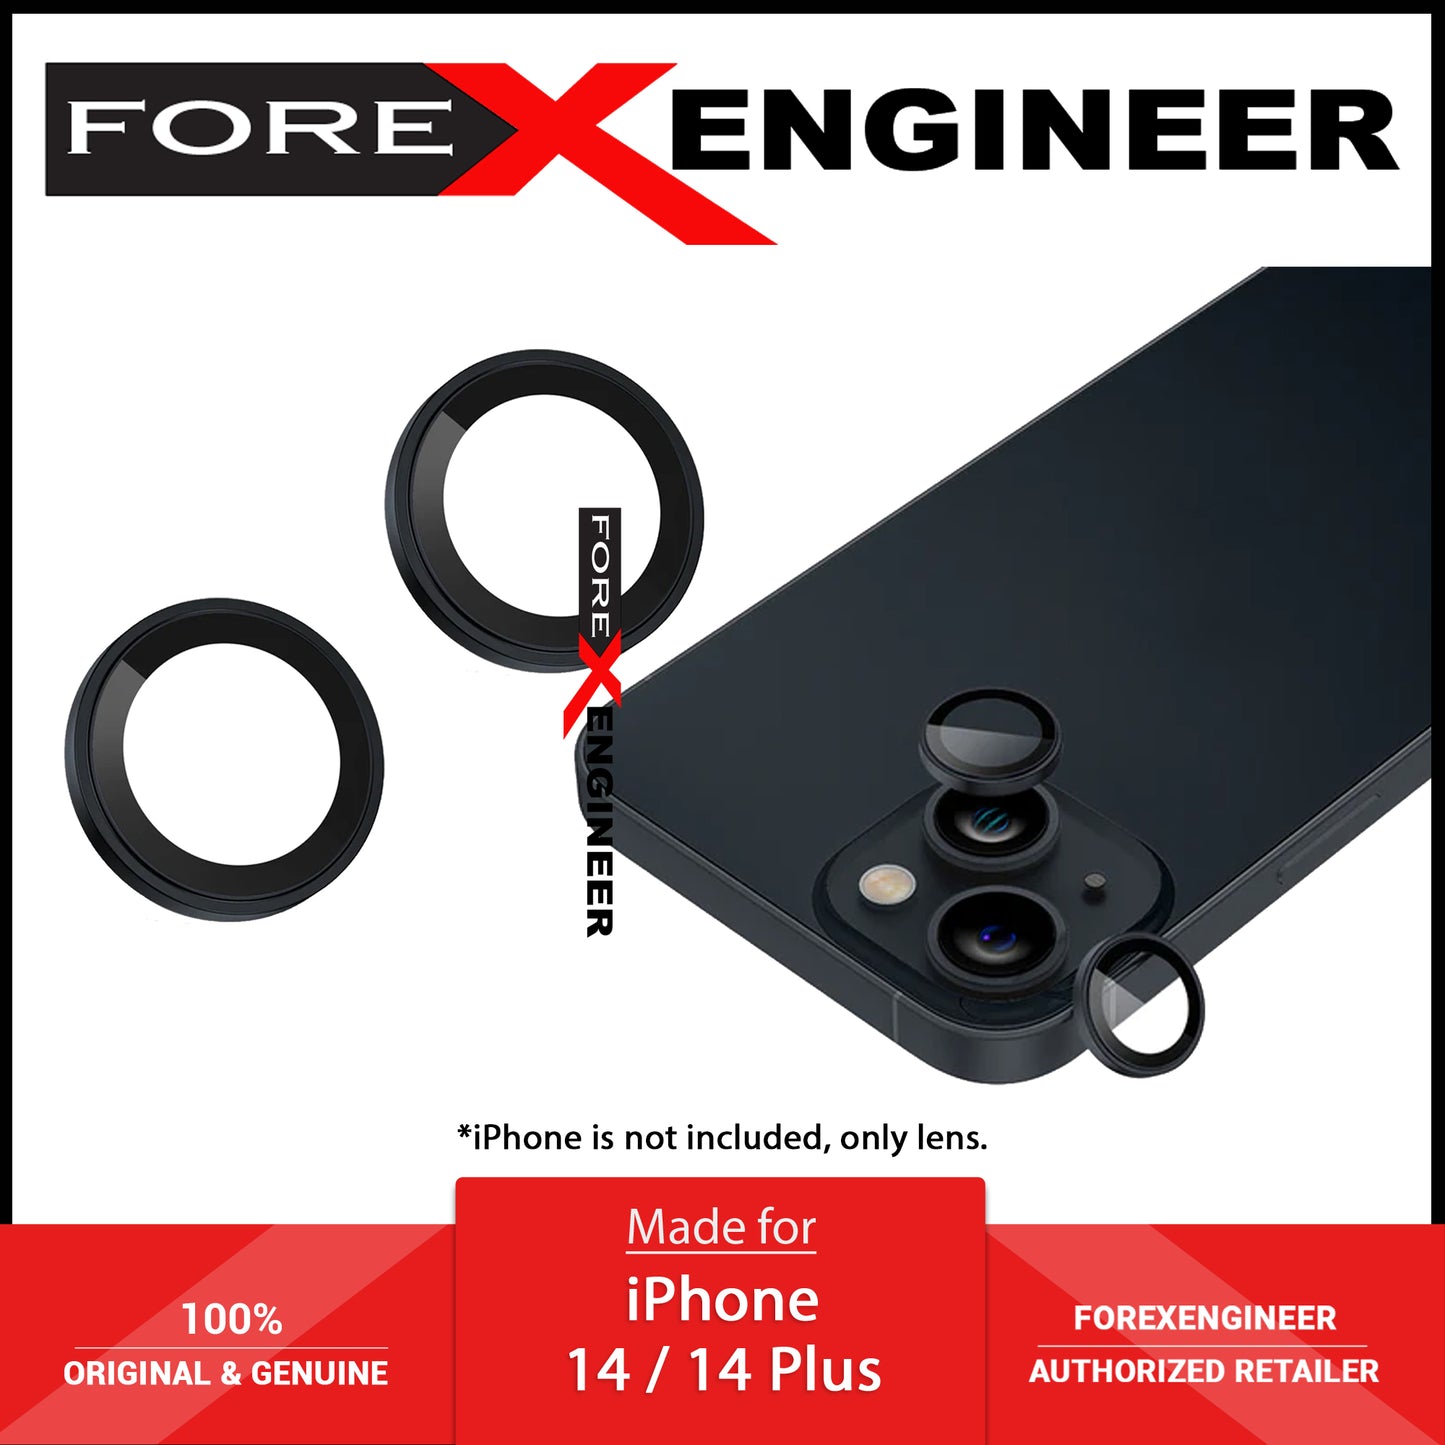 Amazingthing Lens Protector for iPhone 14 - 14 Plus - Black (Barcode: 4892878076012 )